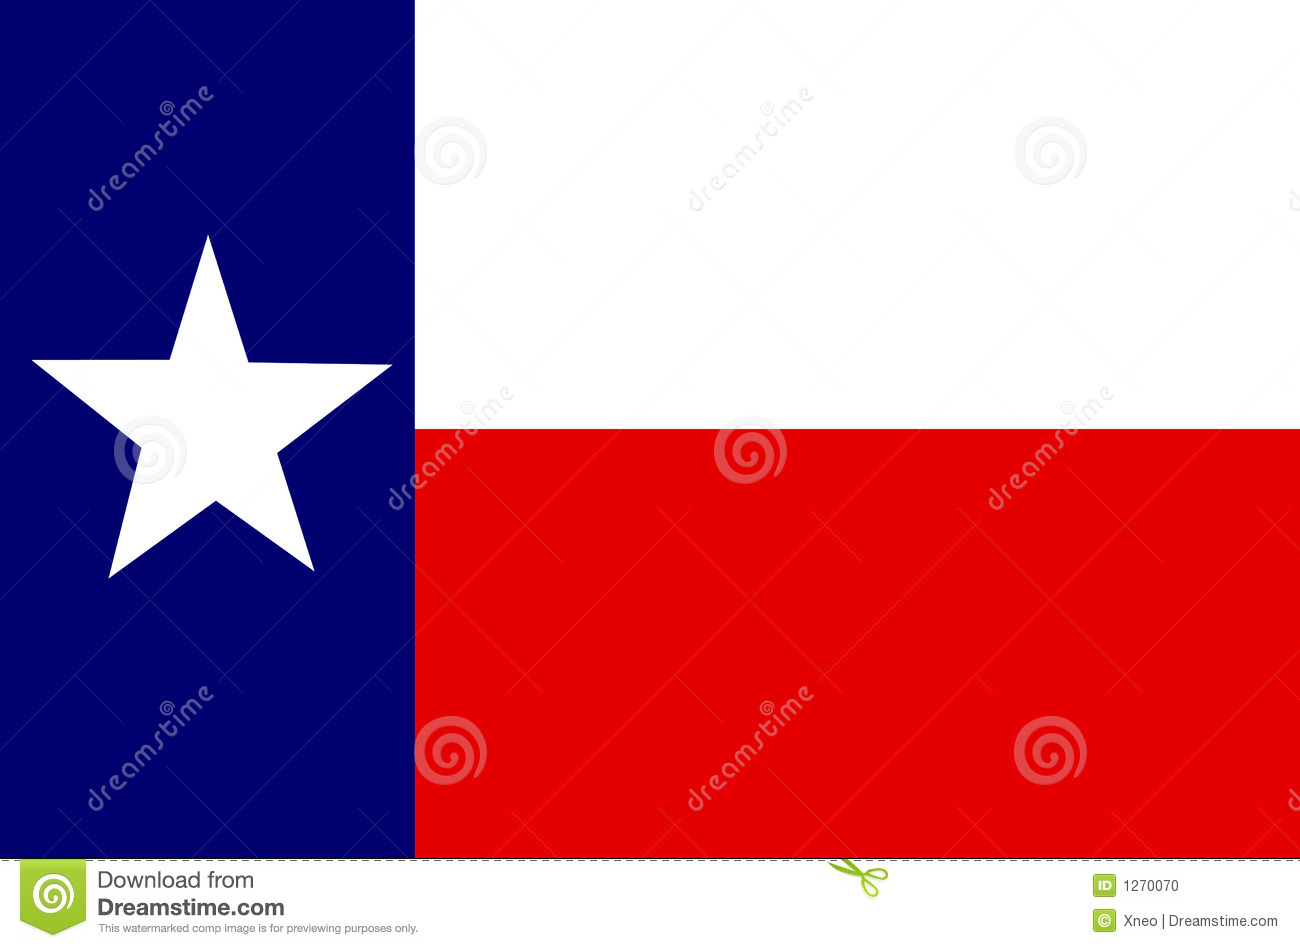 Texas Flag   The Lone Star State Stock Photo   Image  1270070